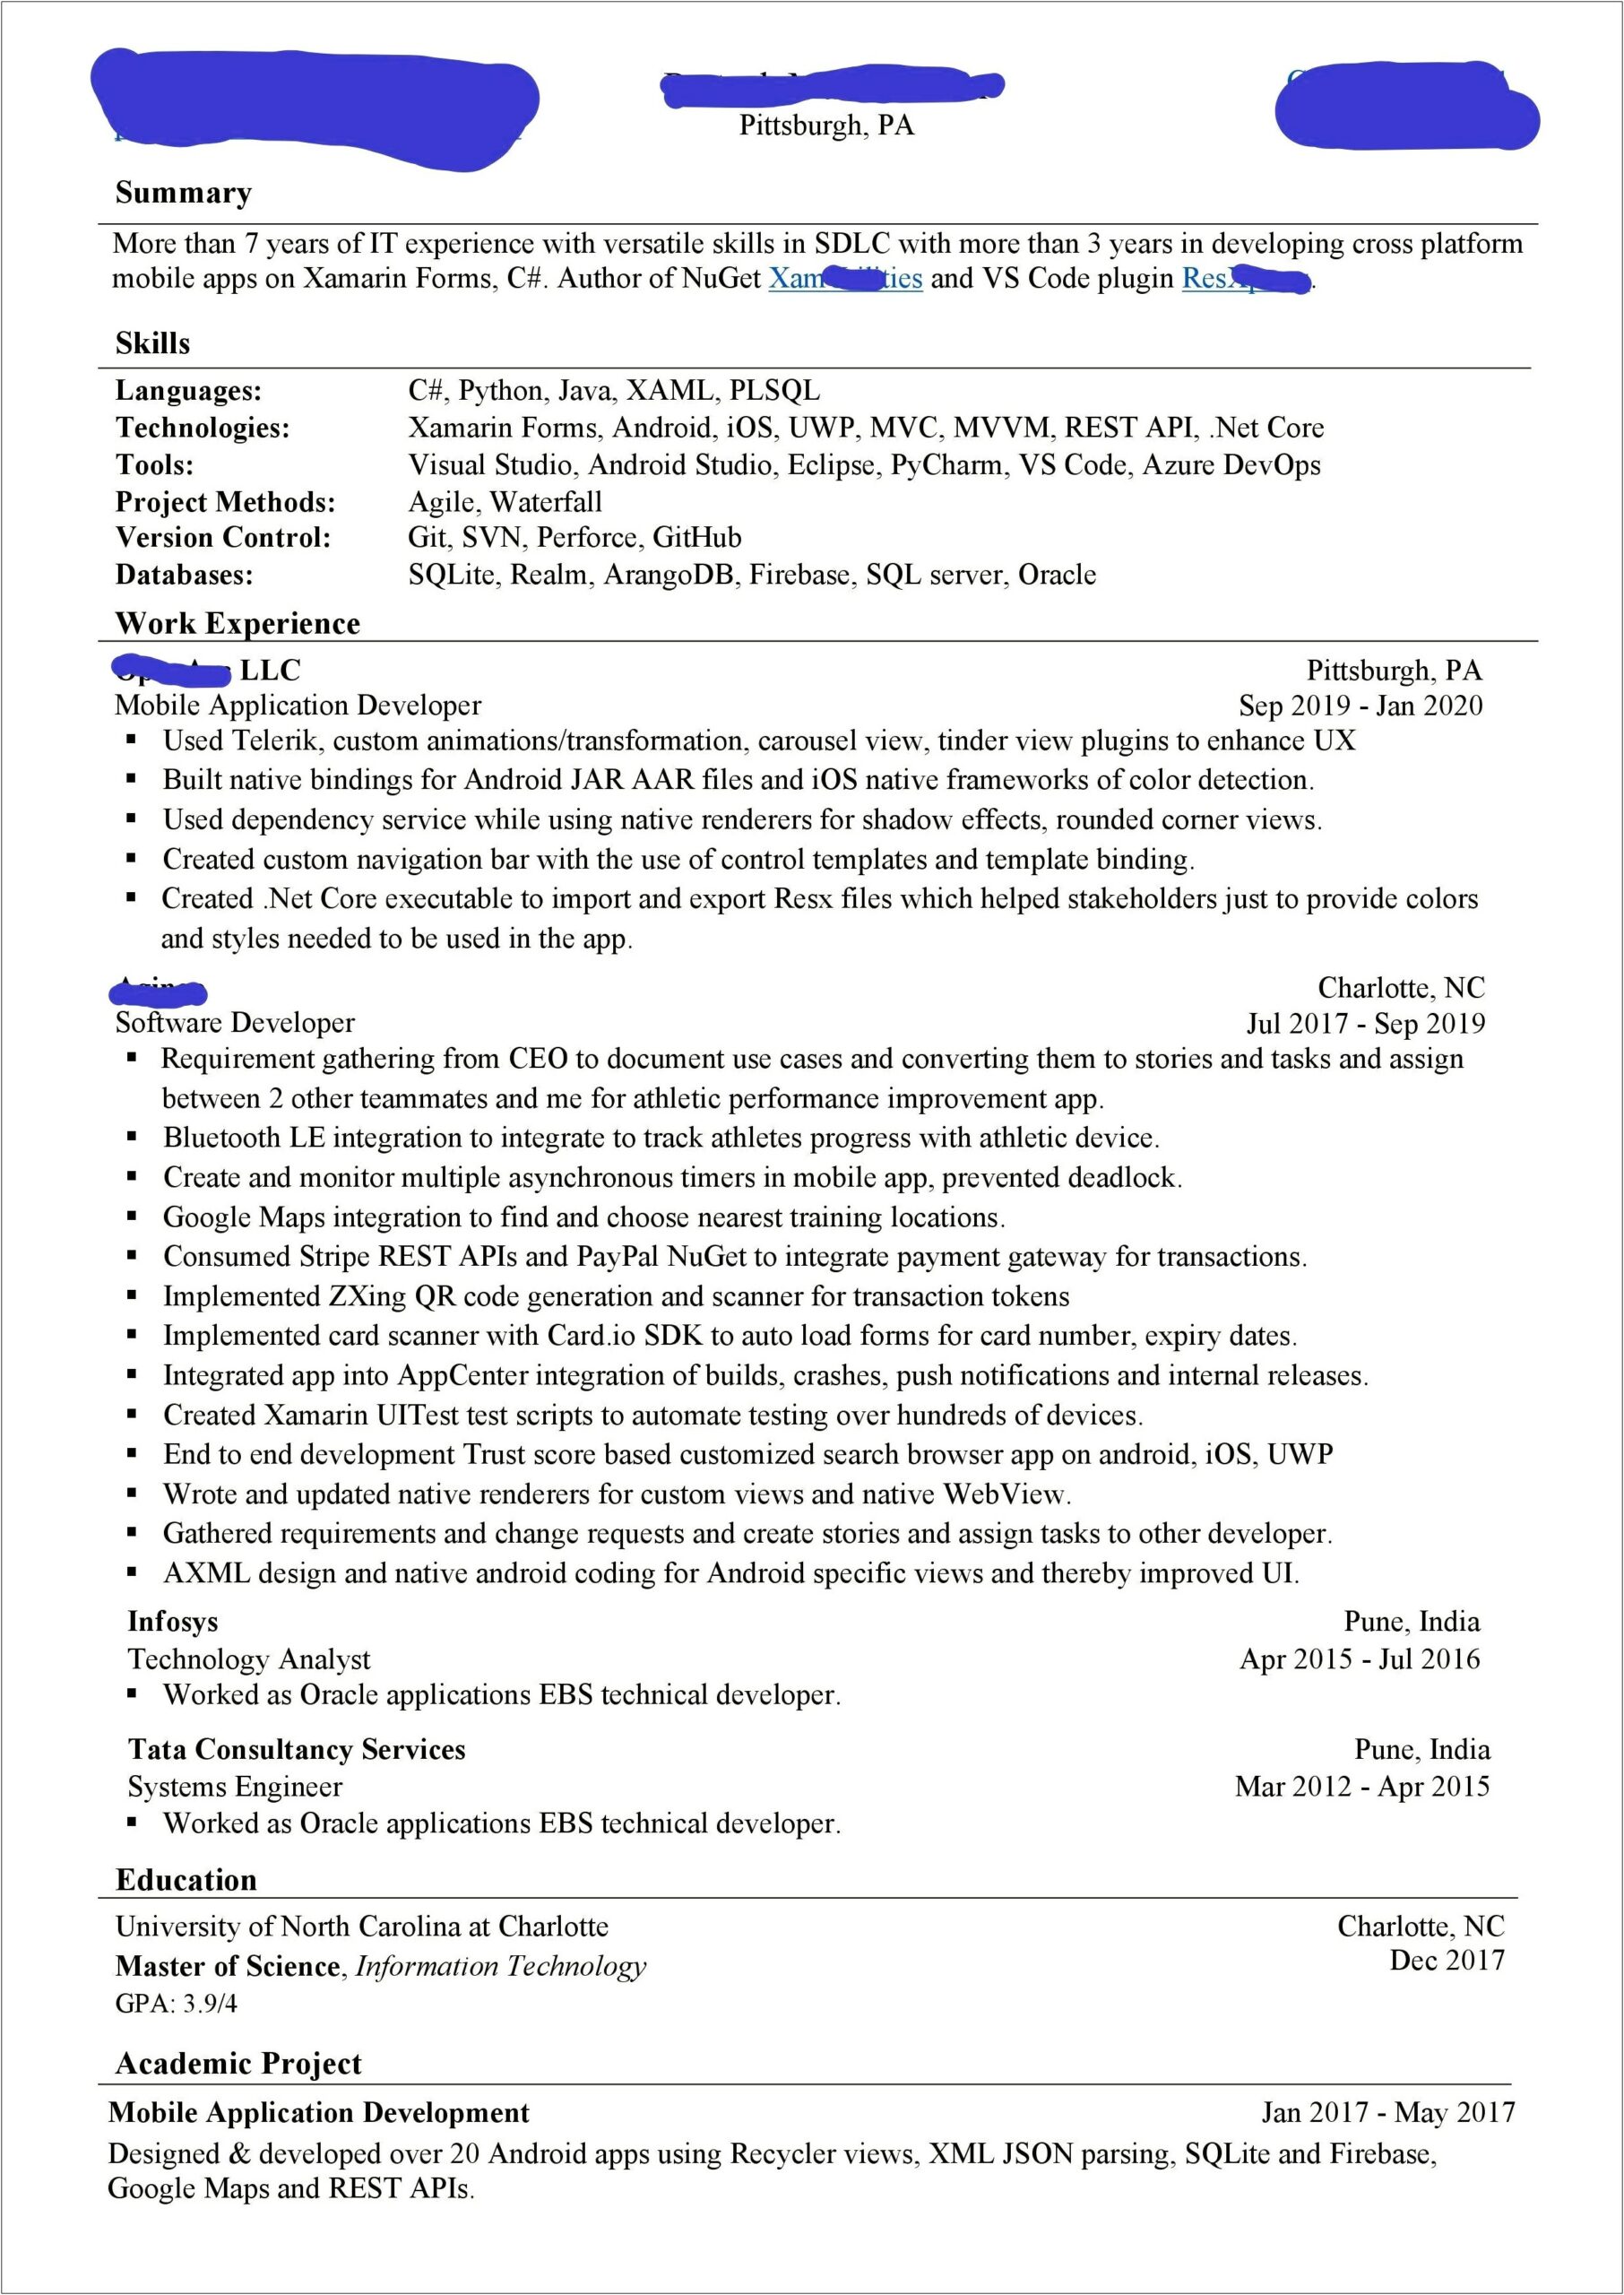 Android Developer 3 Years Experience Resume